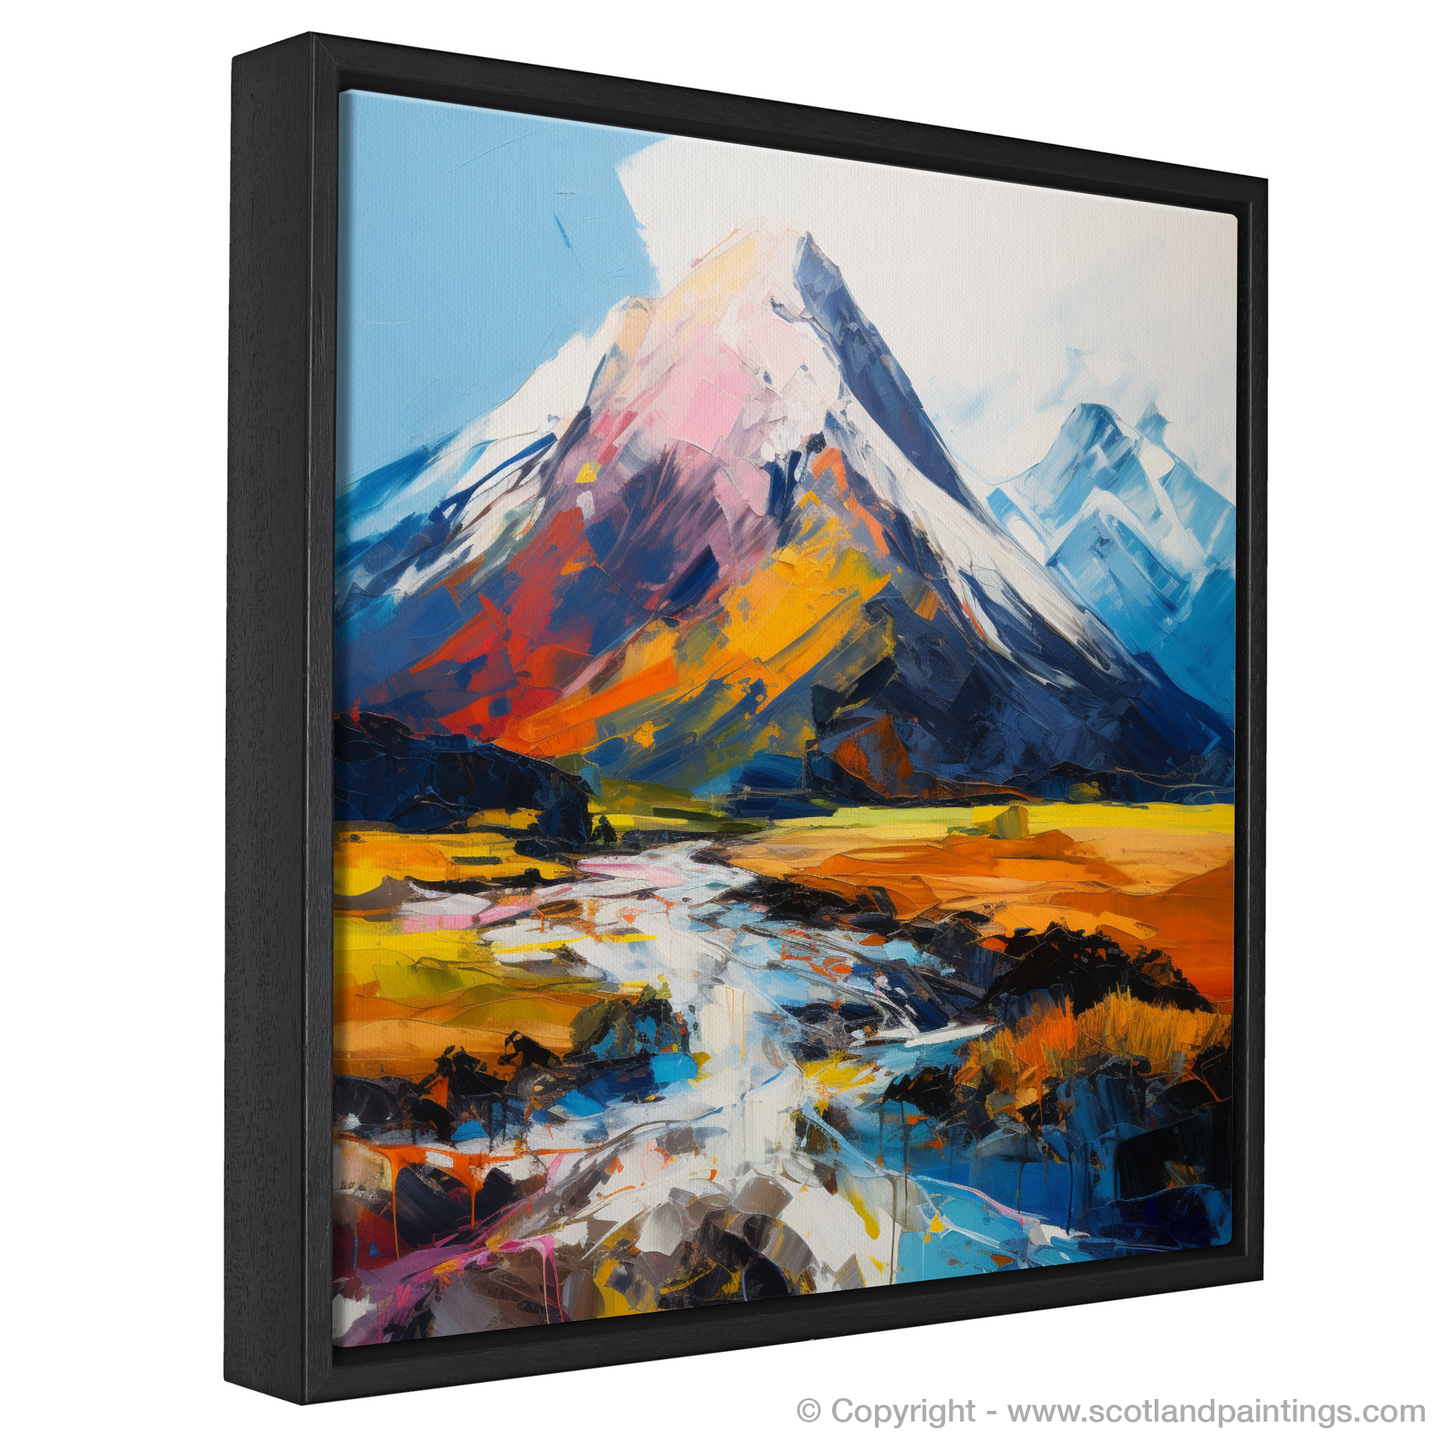 Painting and Art Print of Ben Nevis entitled "Emotional Summit: An Expressionist Ode to Ben Nevis".